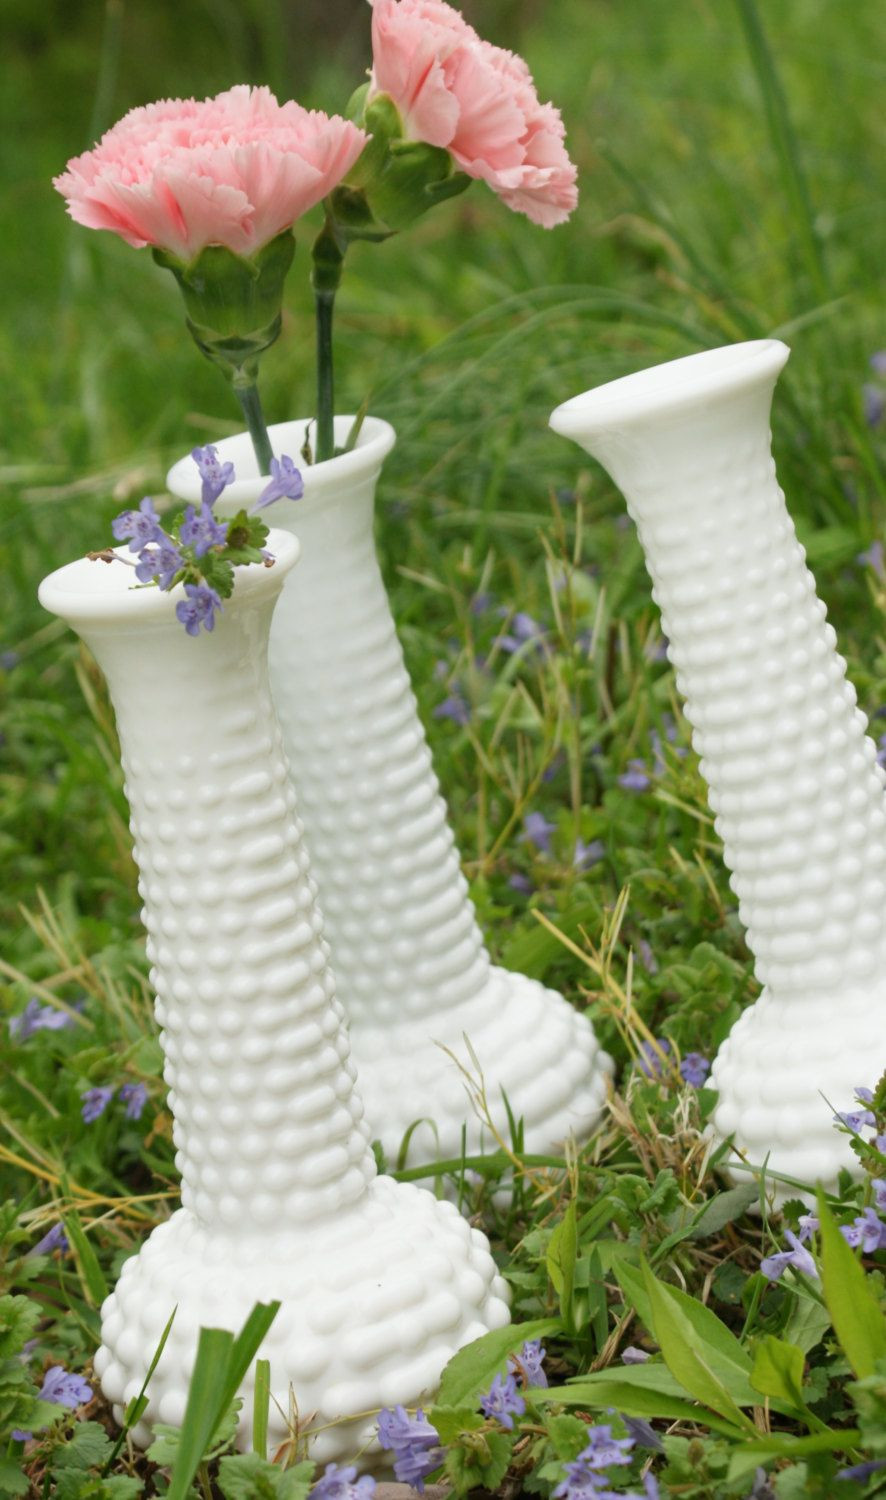 13 Cute White Milk Glass Bud Vases 2024 free download white milk glass bud vases of vintage milk glass group bud vases white hobnail by daydreamingkat inside vintage milk glass group bud vases white hobnail by daydreamingkat 17 95